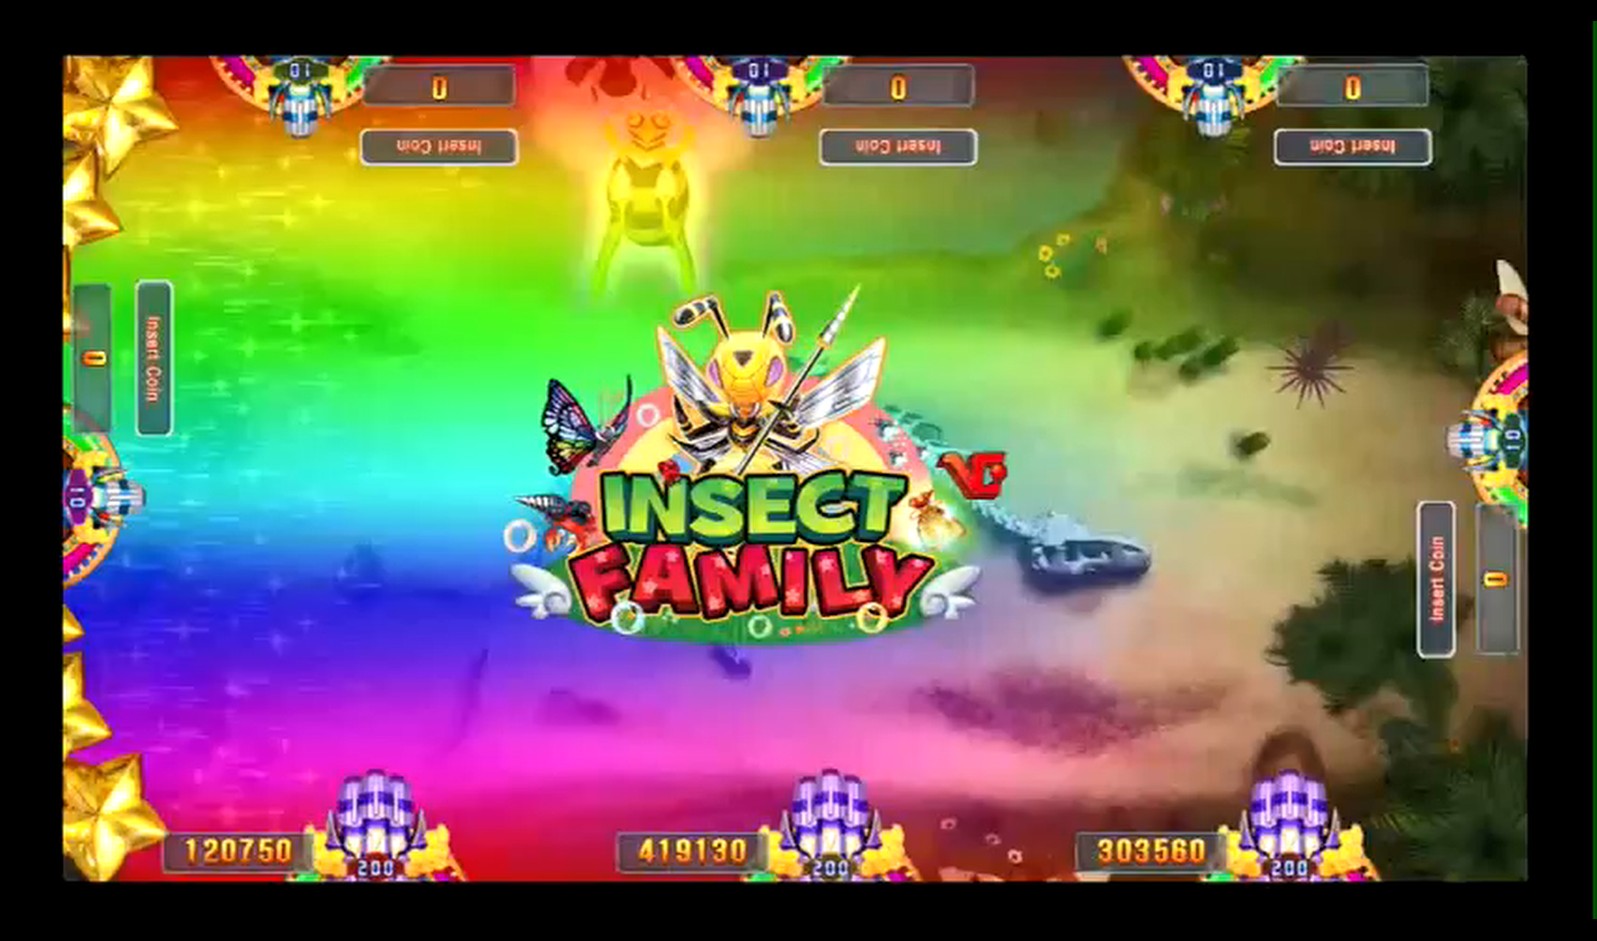 Insect-Family-Kit-Vgame-Hot-Sale-Taiwan-Vgame-Fishing-game-Entertainment-Fishing-Casino-Shooting-Fish-Game-Machine-fish-game-software-Tomy-Arcade